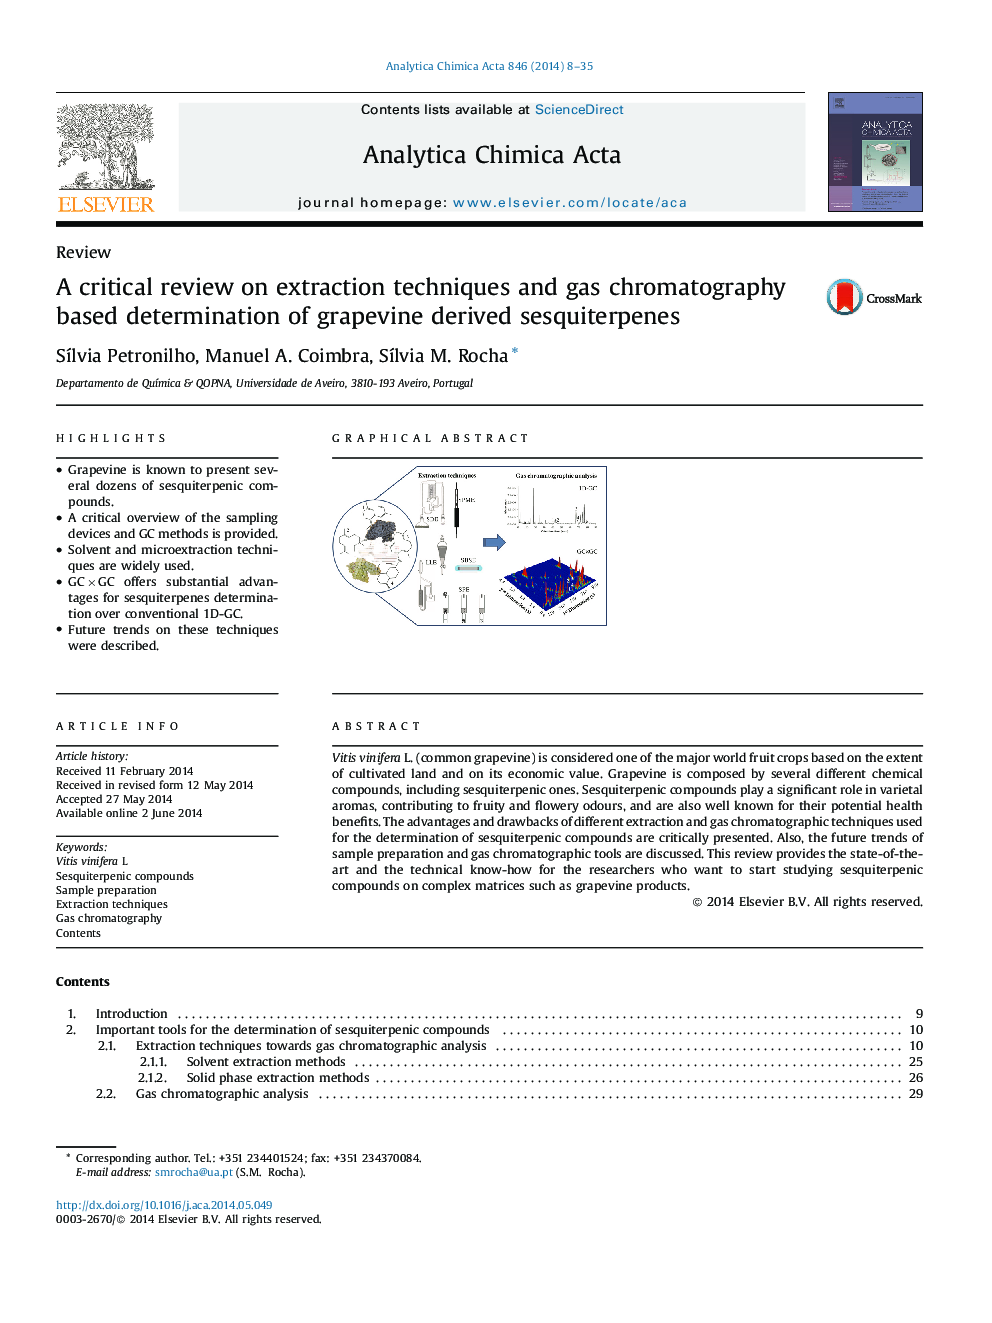 A critical review on extraction techniques and gas chromatography based determination of grapevine derived sesquiterpenes